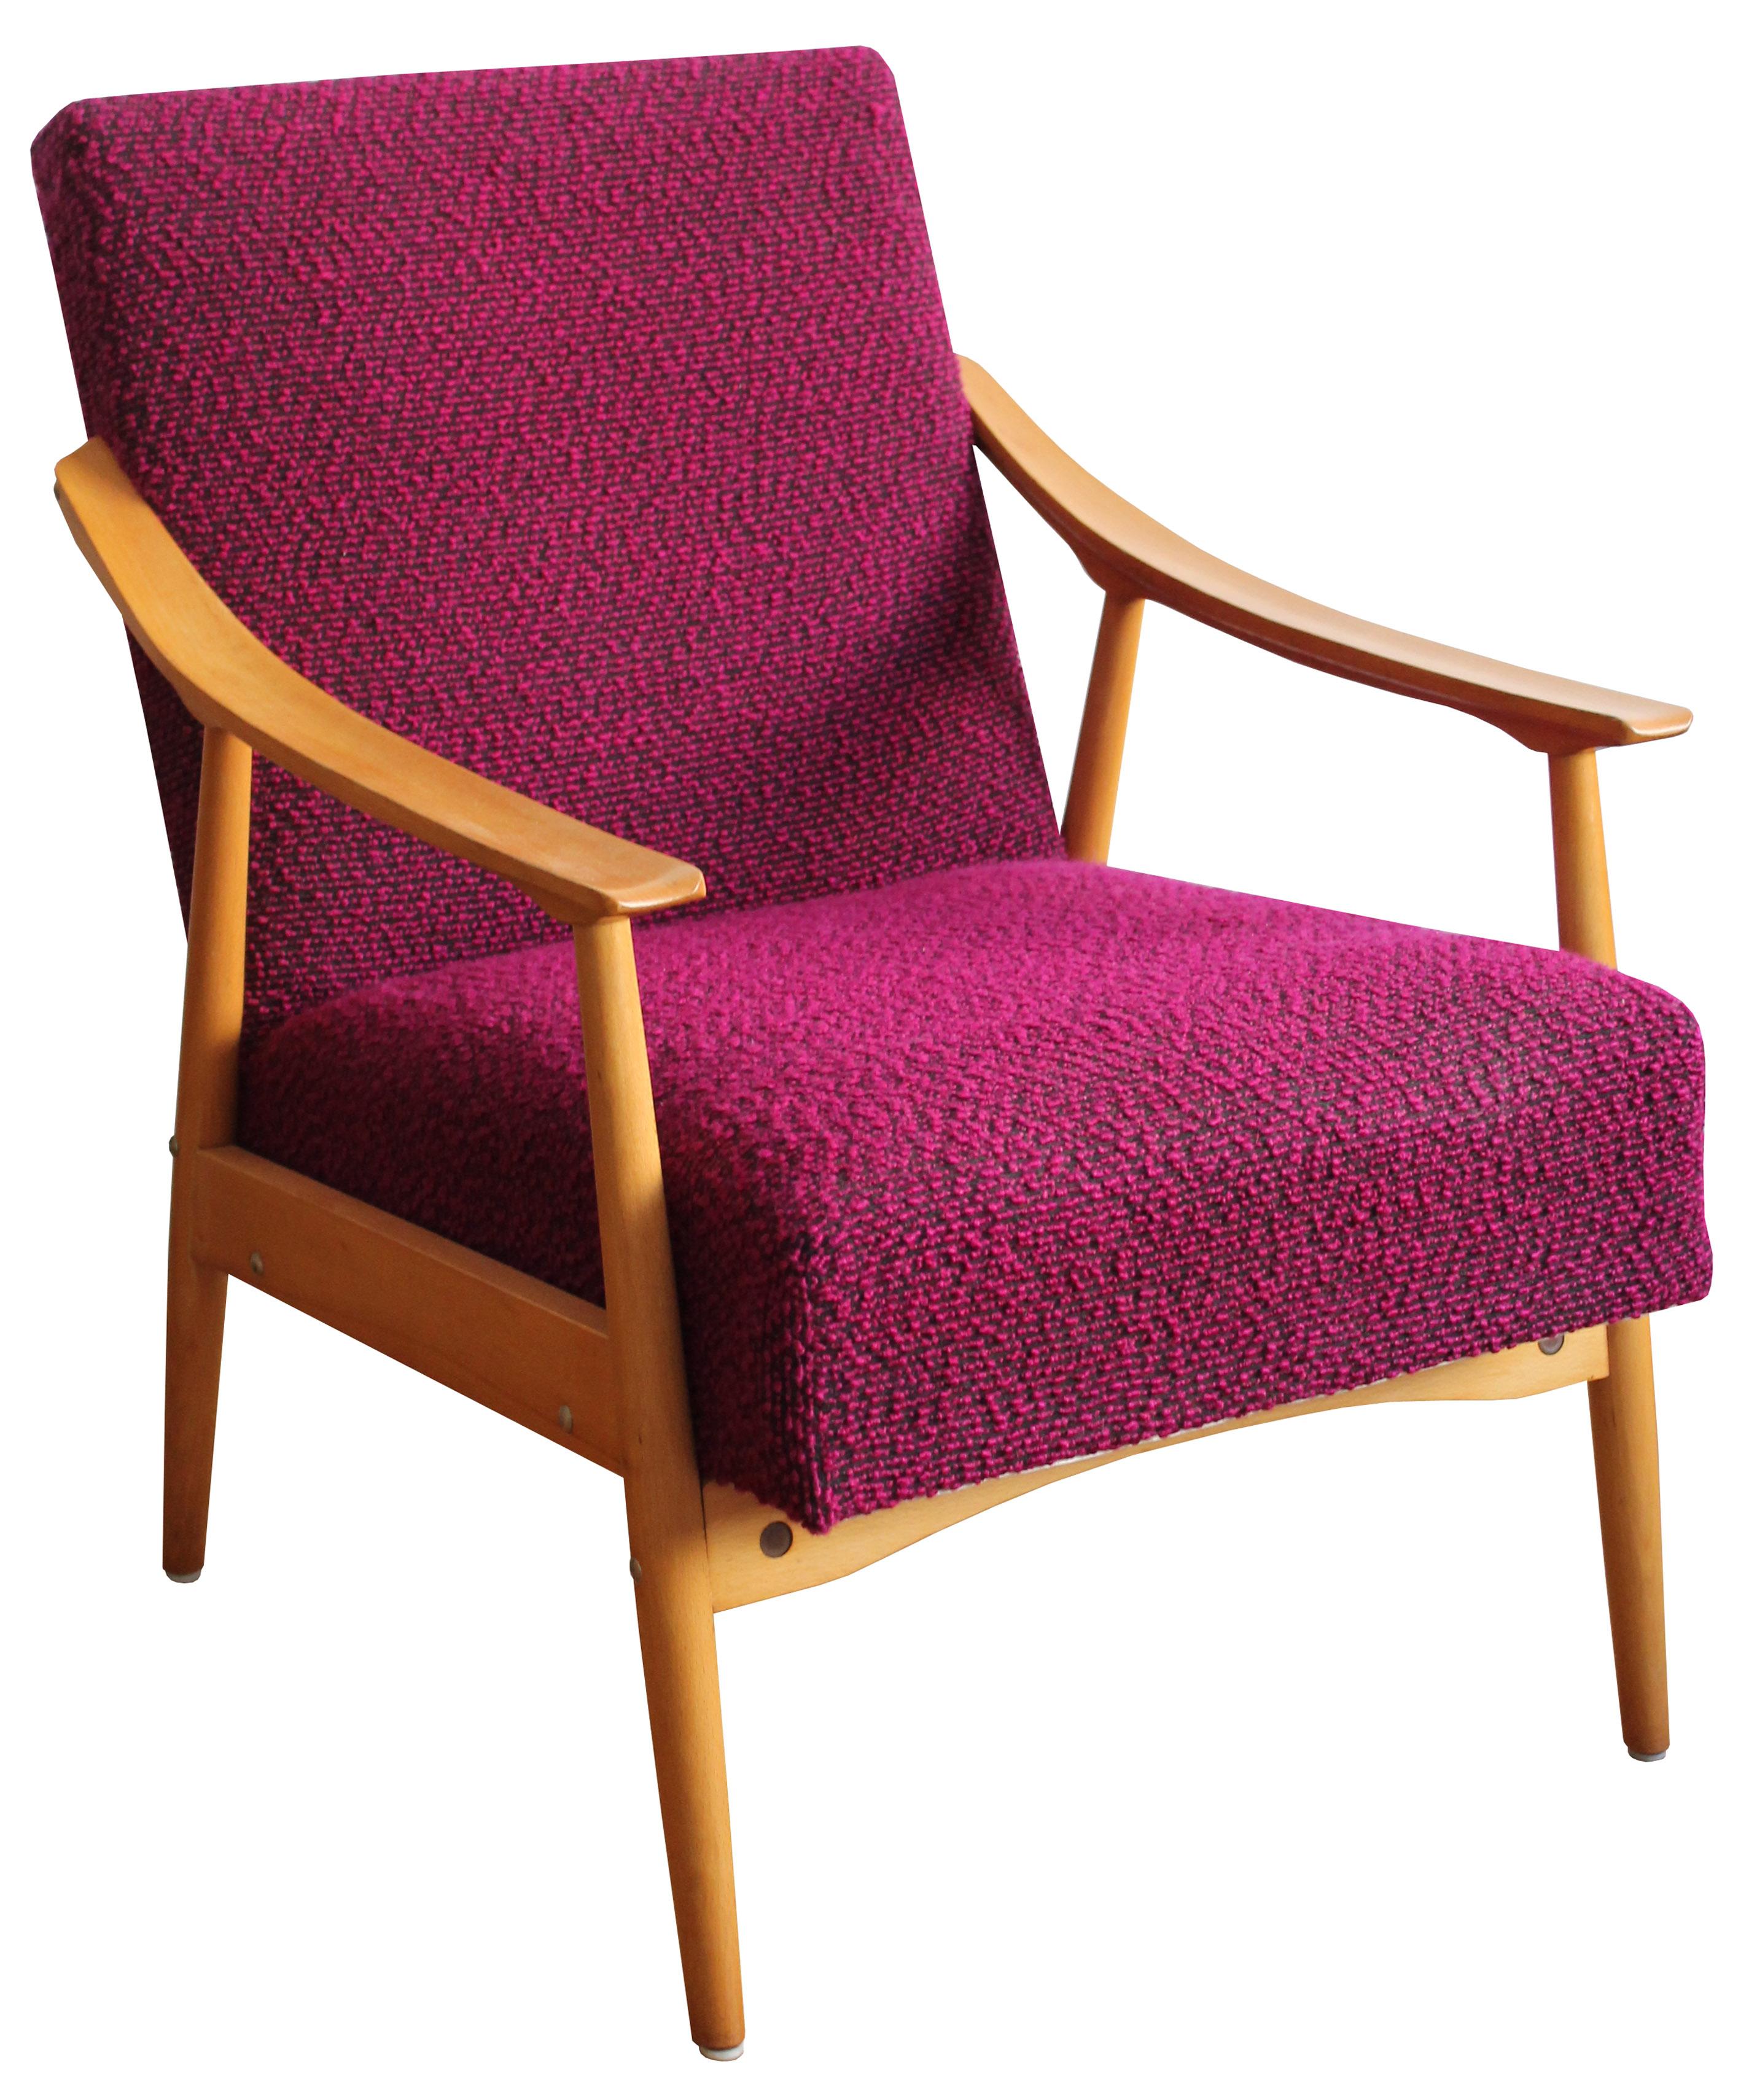 A midcentury armchair. Rare, unusual, comfortable and fun. That is probably the best way to describe this midcentury armchair.

The piece still has the original bright red/ pink fabric which creates a great contrast with the light tone of the